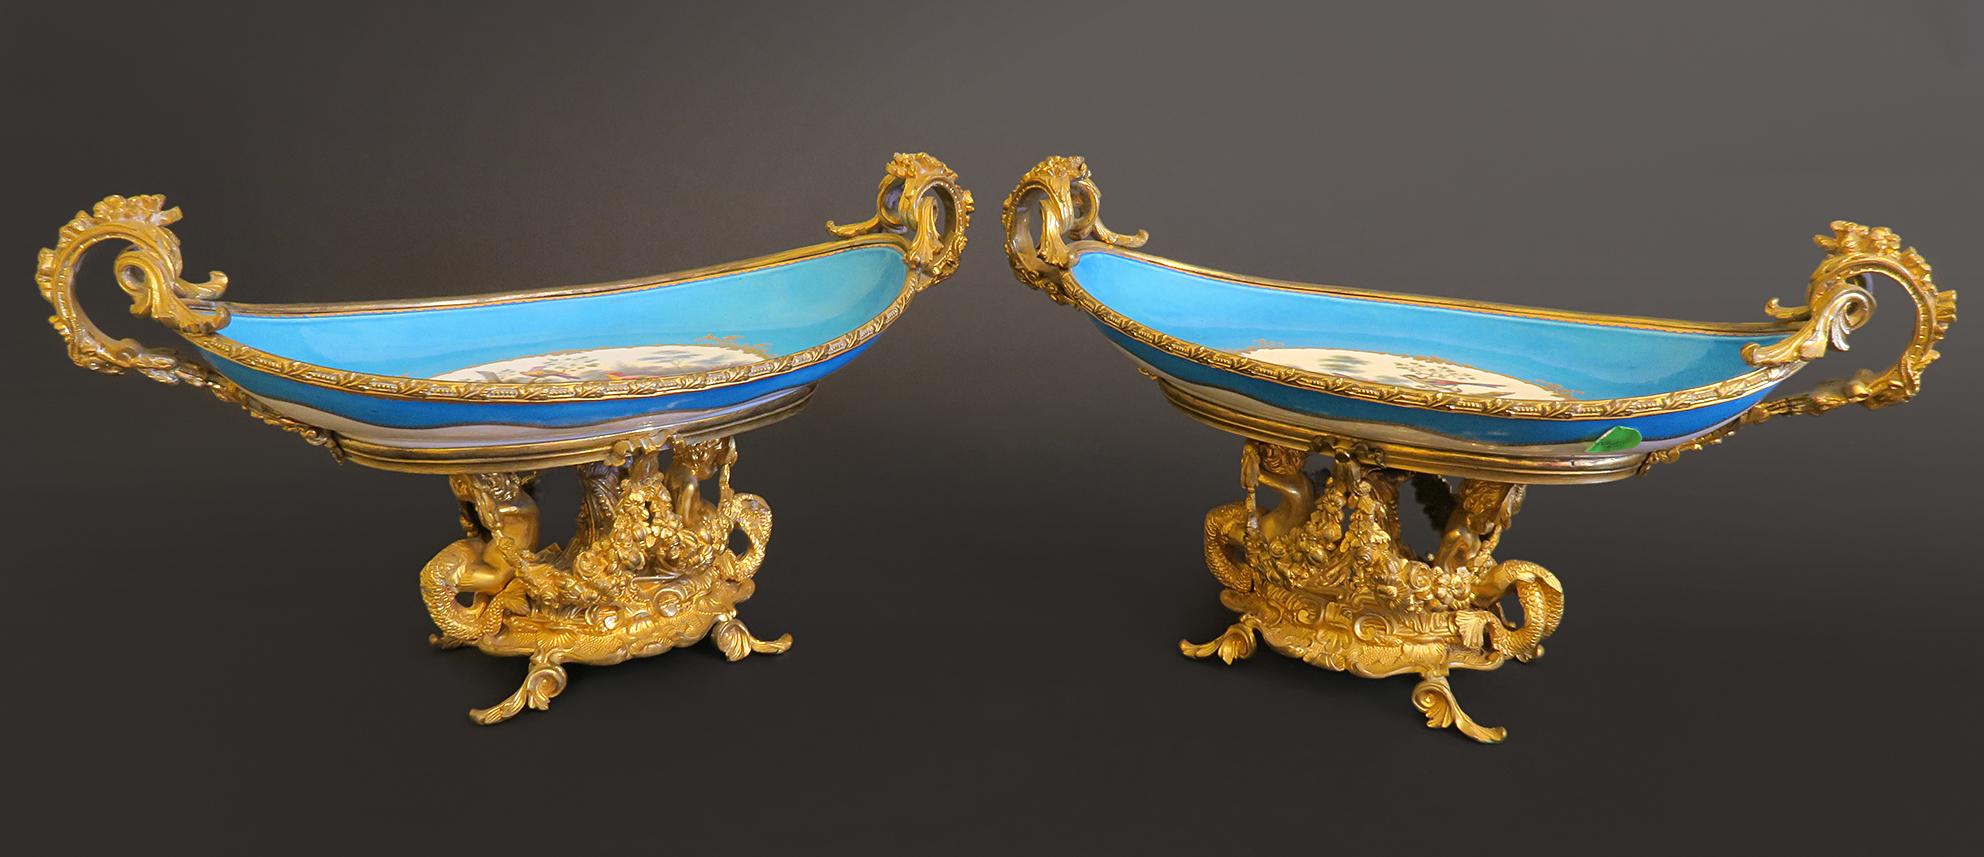 Pair Of French Ormolu Mounted Sevres porcelain centerpiece, Early 19th Century.
L: 14-1/2